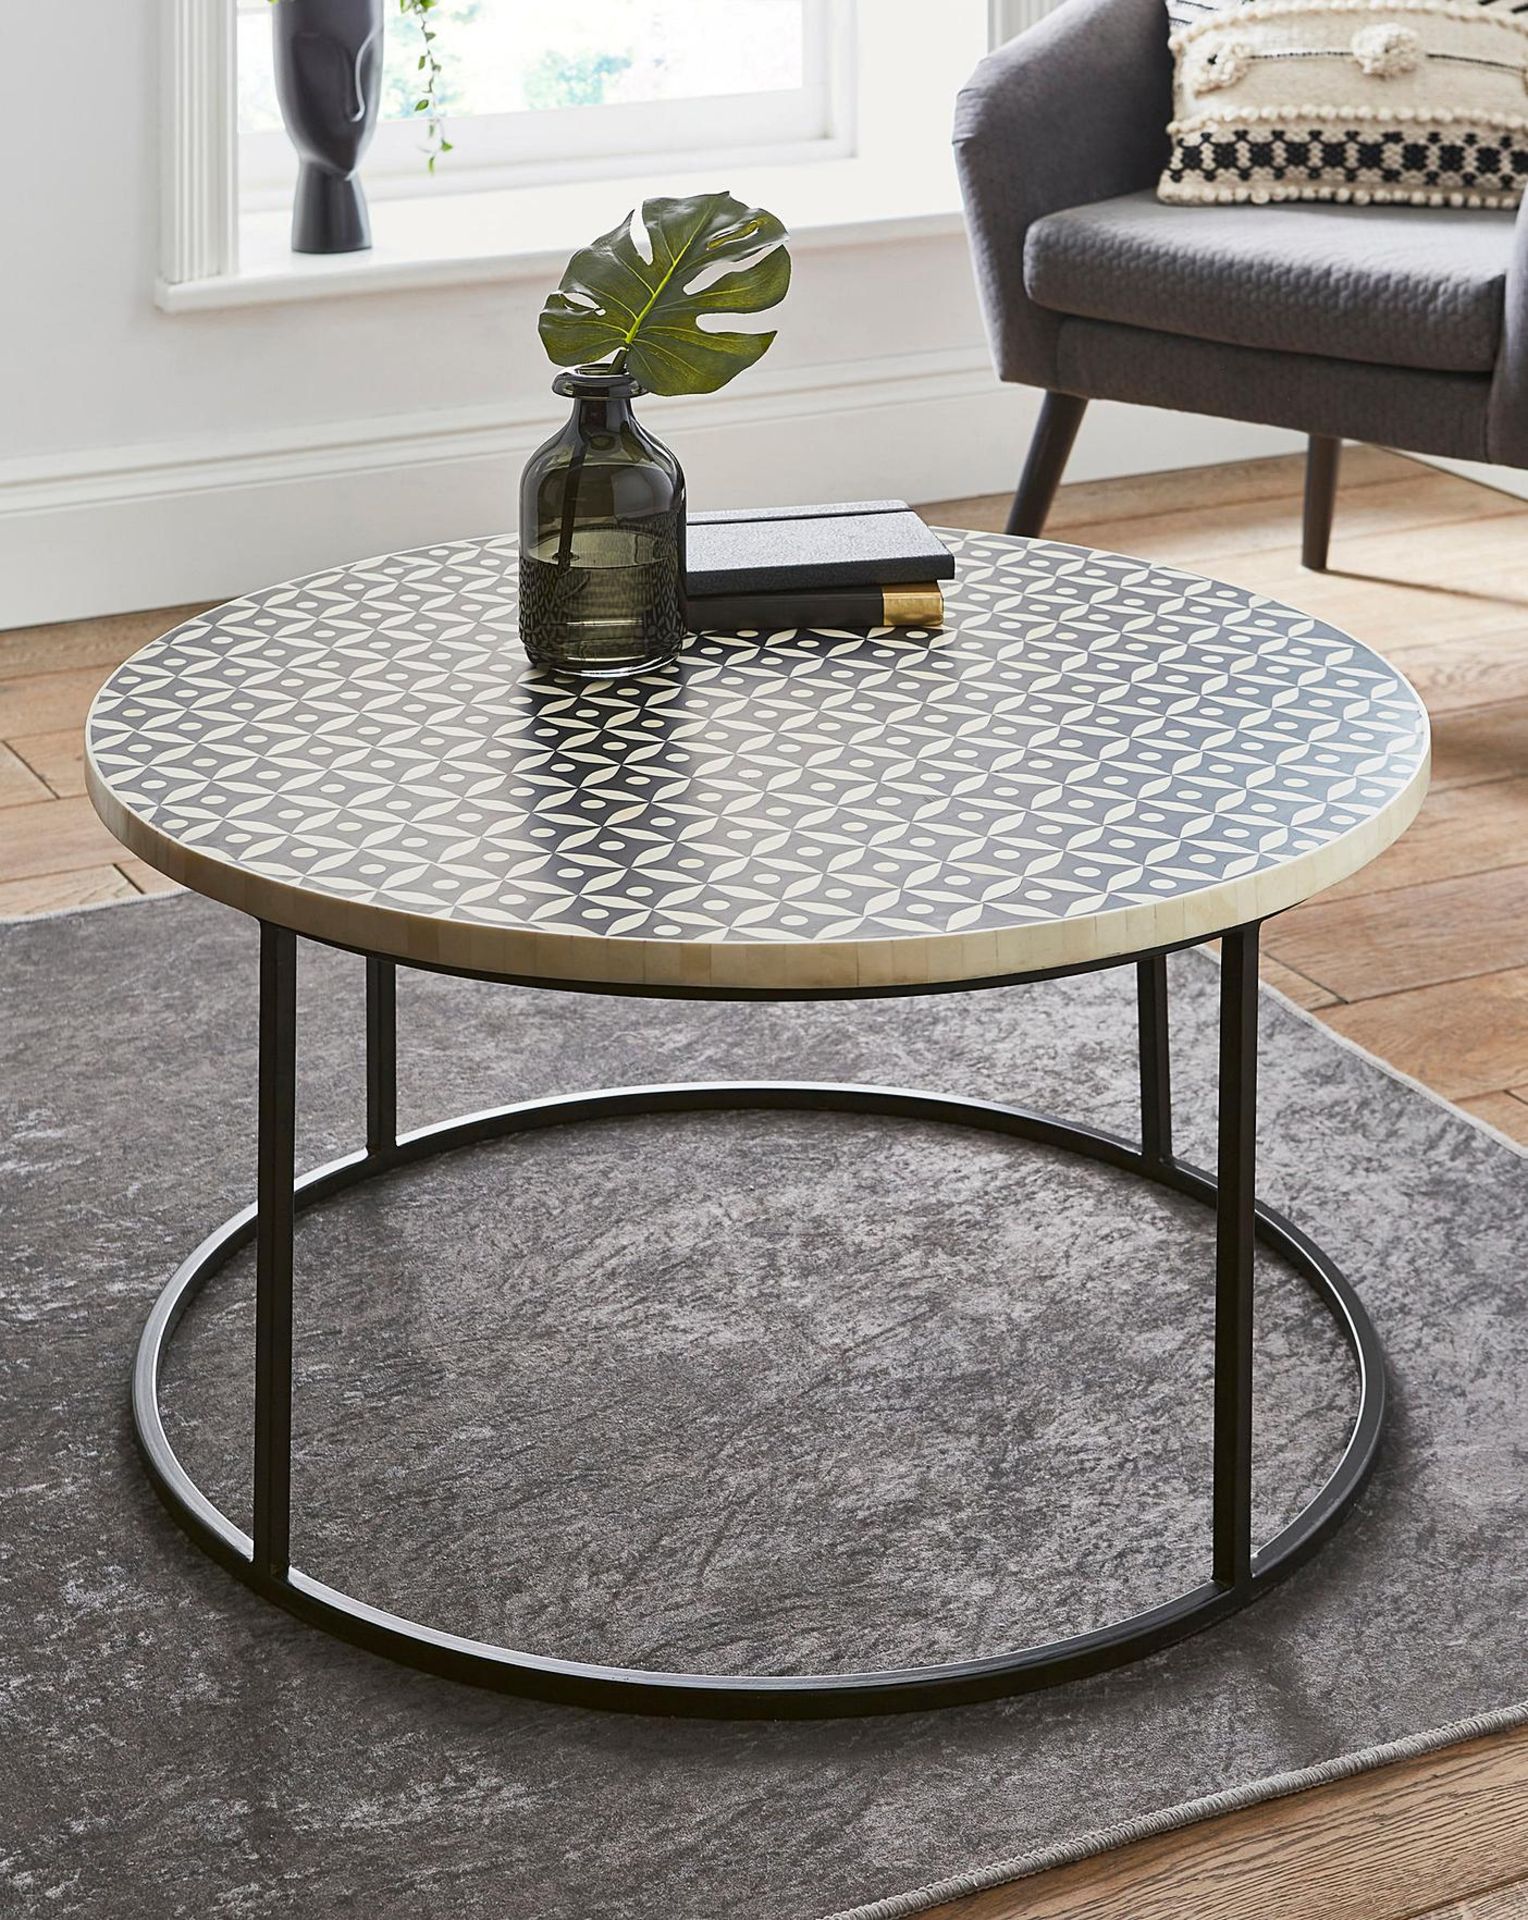 BRAND NEW AALIYAH LUXURY ROUND COFFEE TABLE R11-15